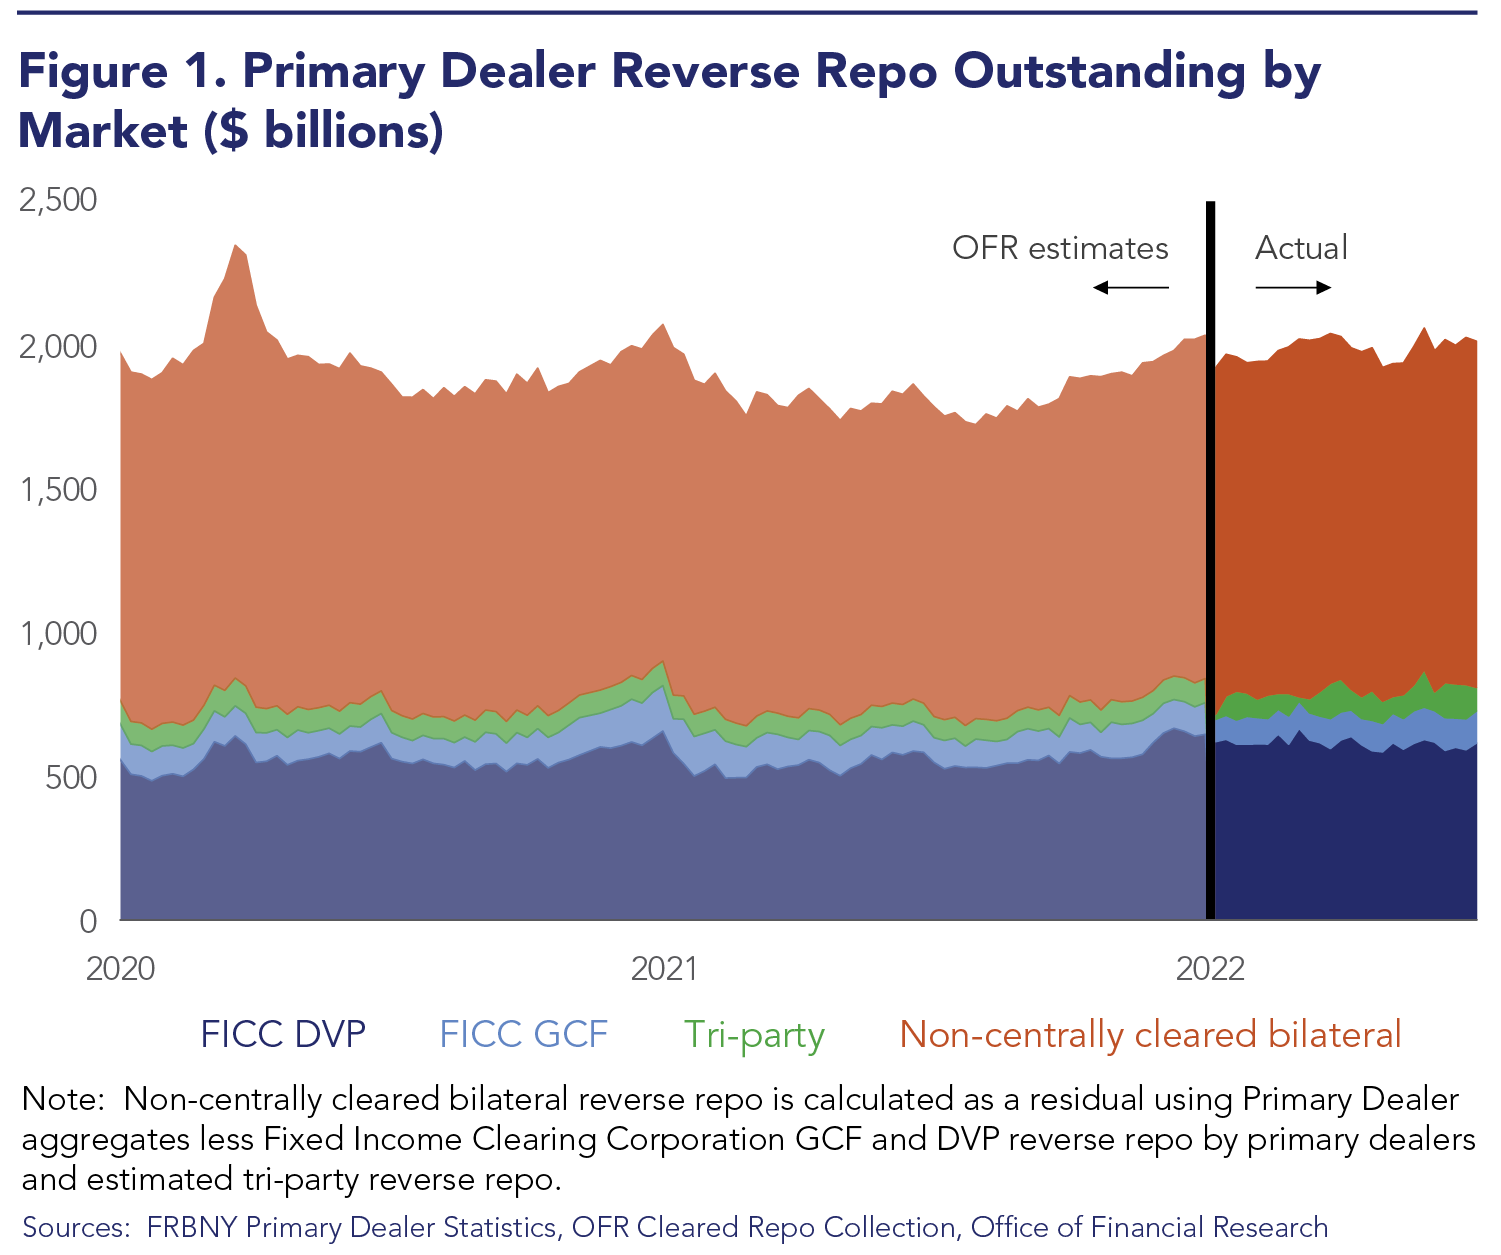 Primary Dealer Reverse Repo Outstanding by Market